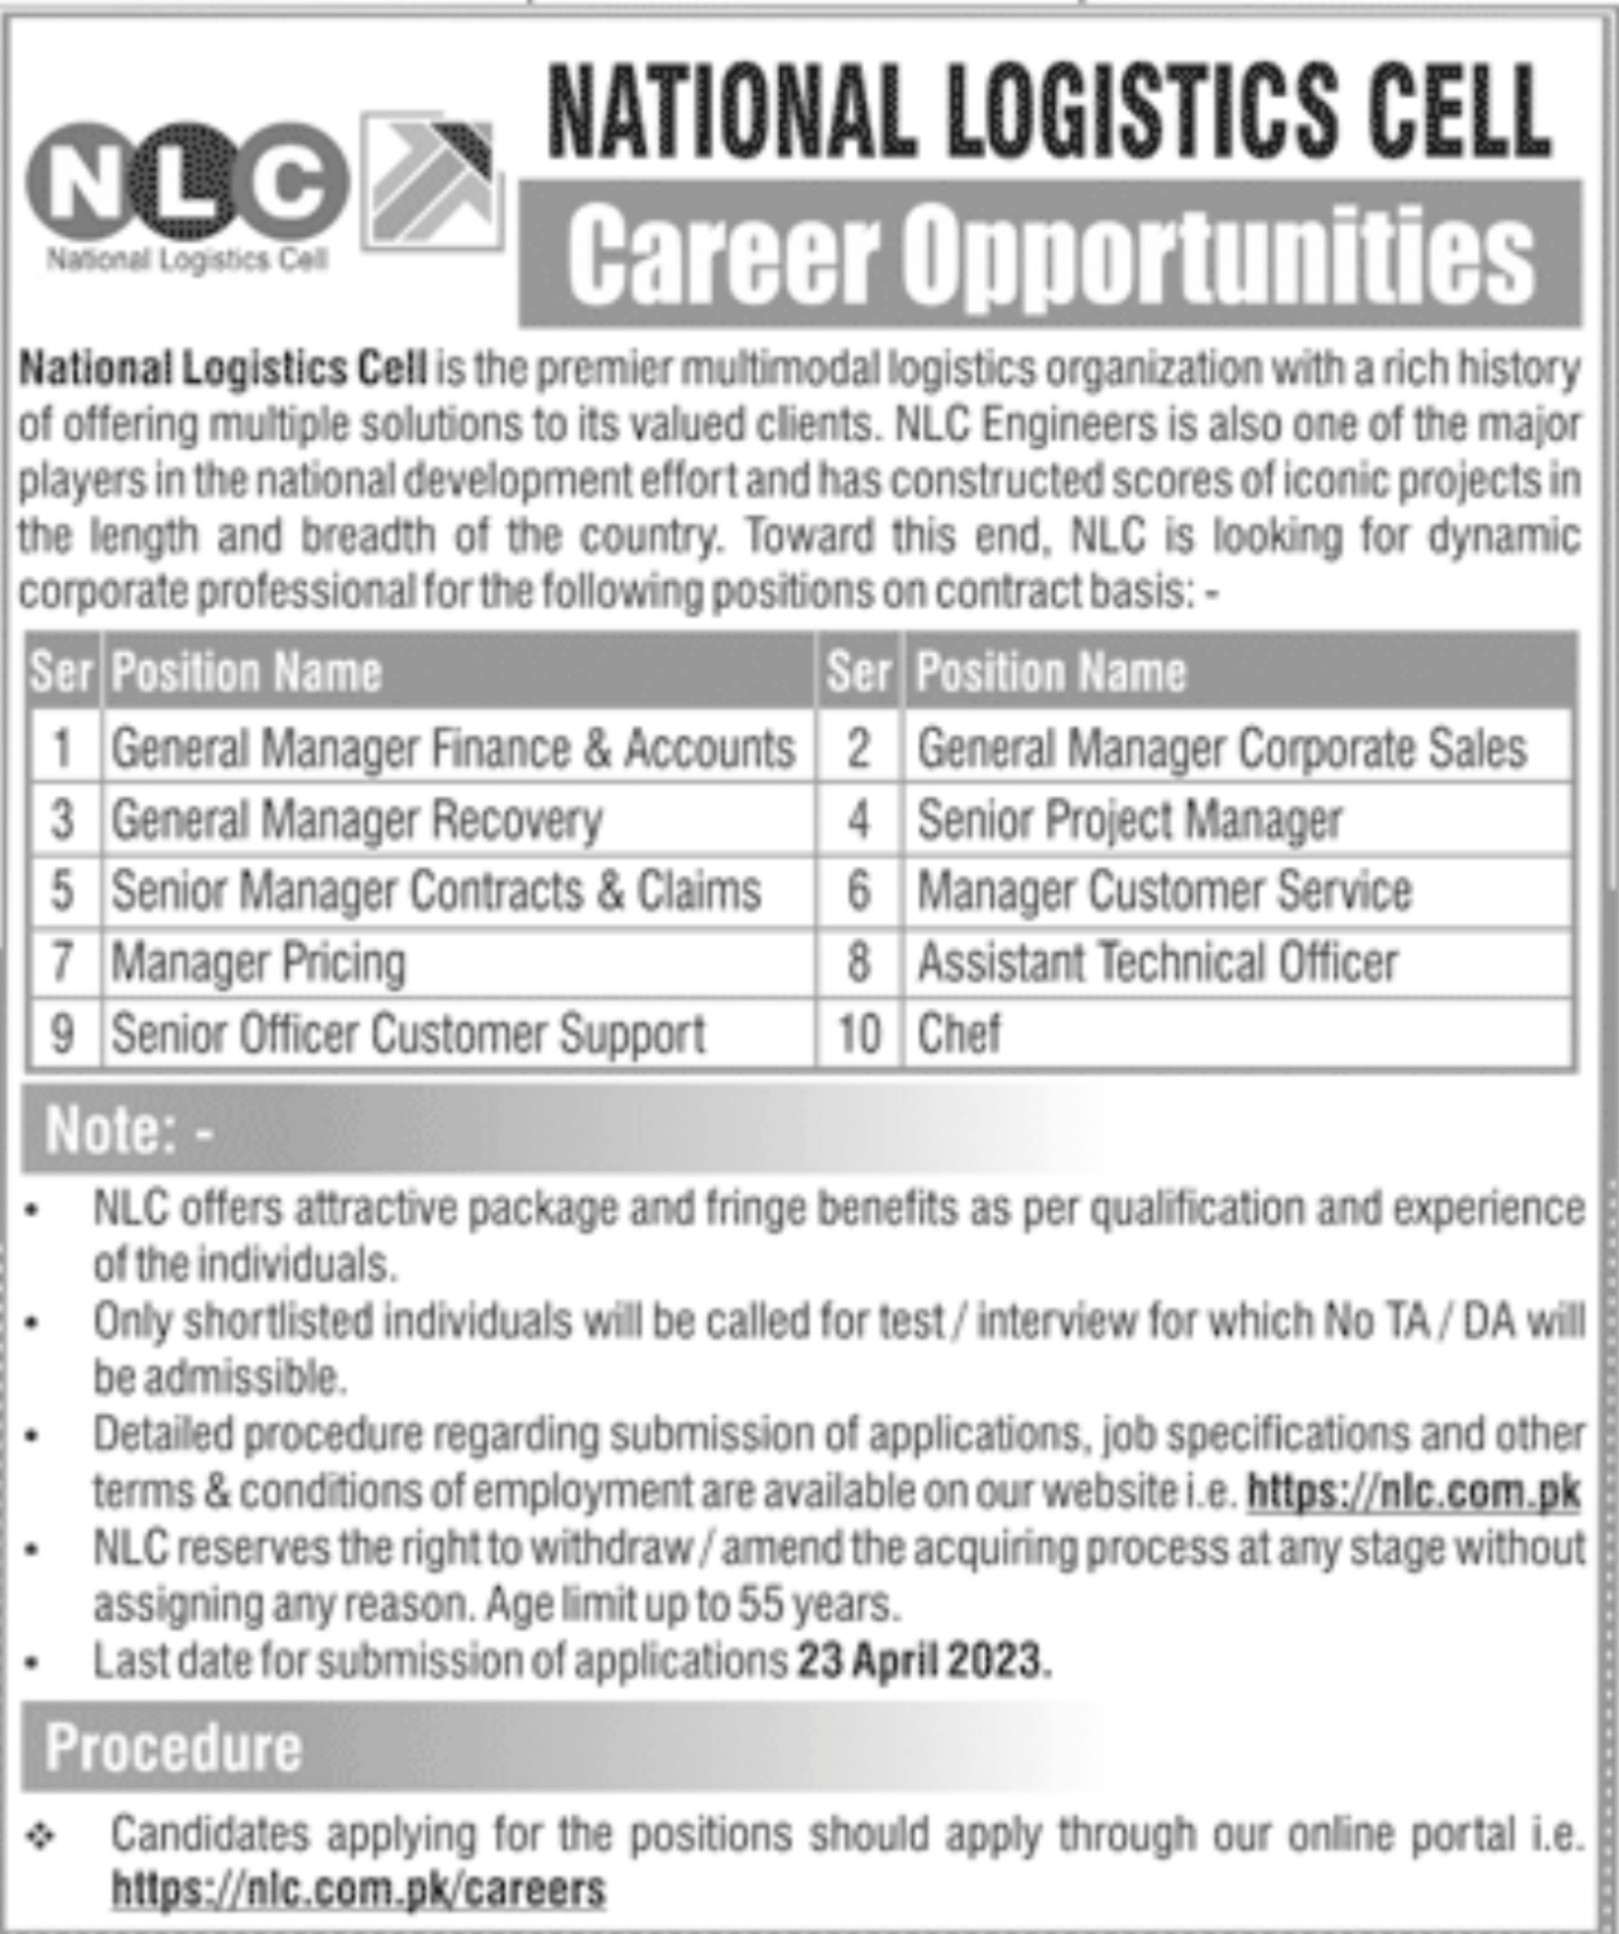 LATEST JOB IN NATIONAL LOGISTICS CELL IN PAKISTAN 2023